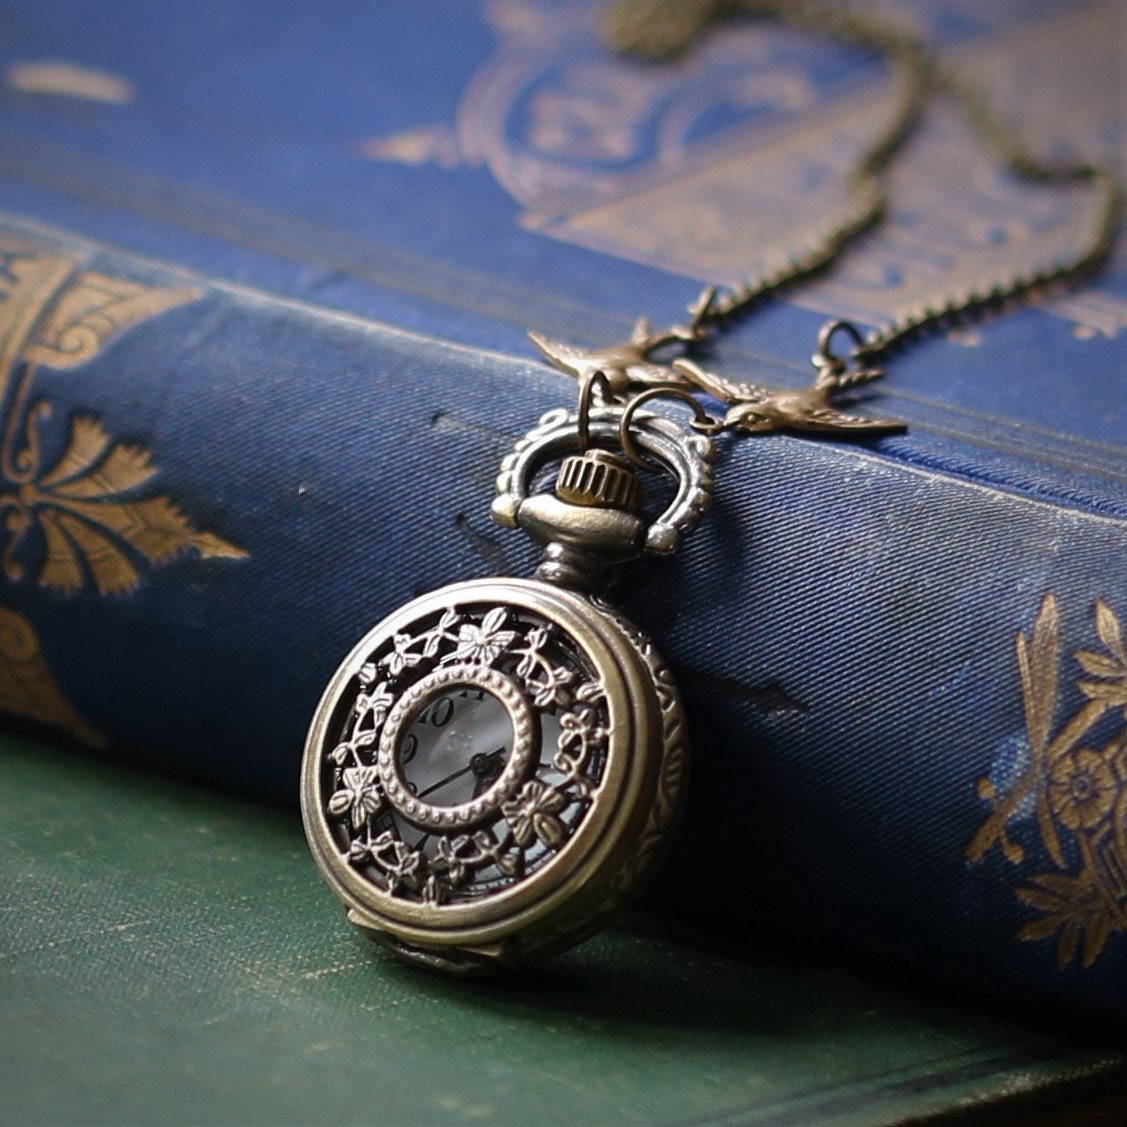 Pocket Watch Necklace - A working Watch Pendant - White Flower Design –  Upcycled Works